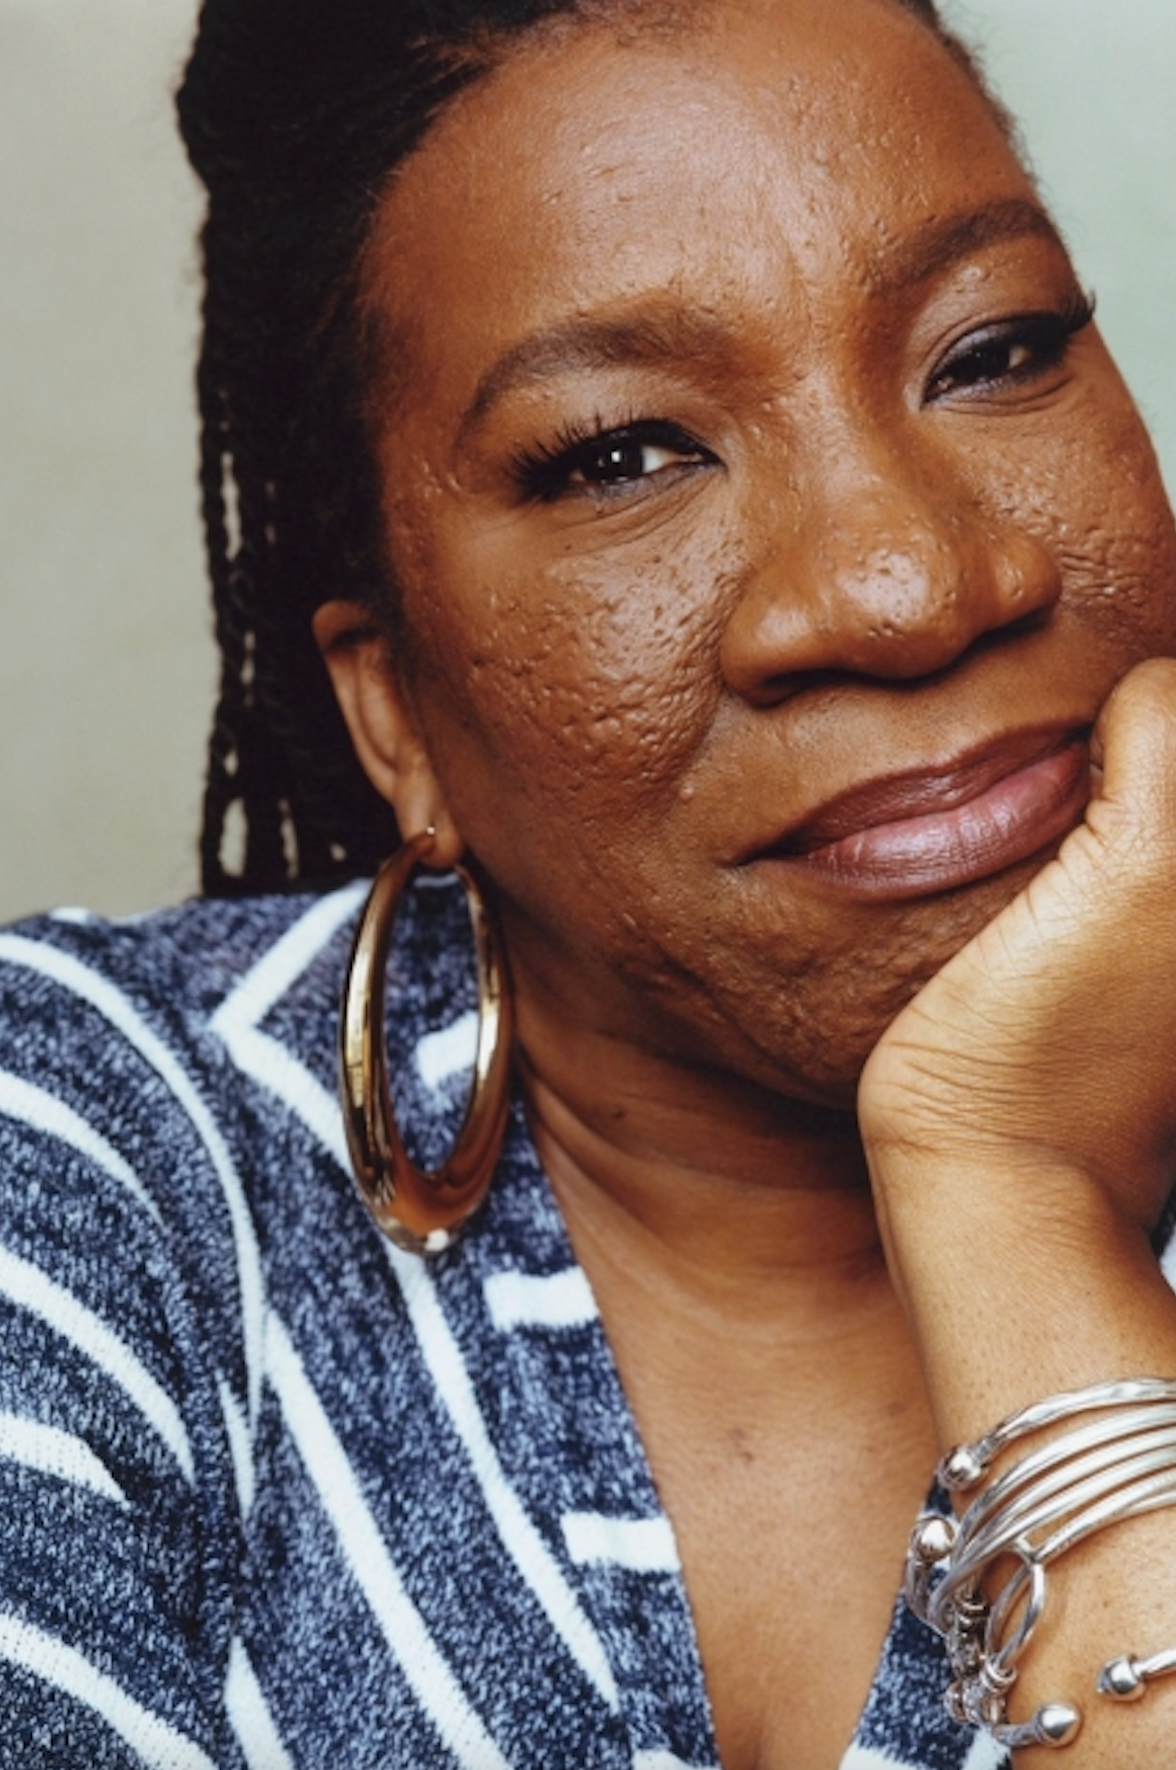 5 Years Of #MeToo: Tarana Burke On Cancel Culture, R. Kelly And Whats Next For The Movement